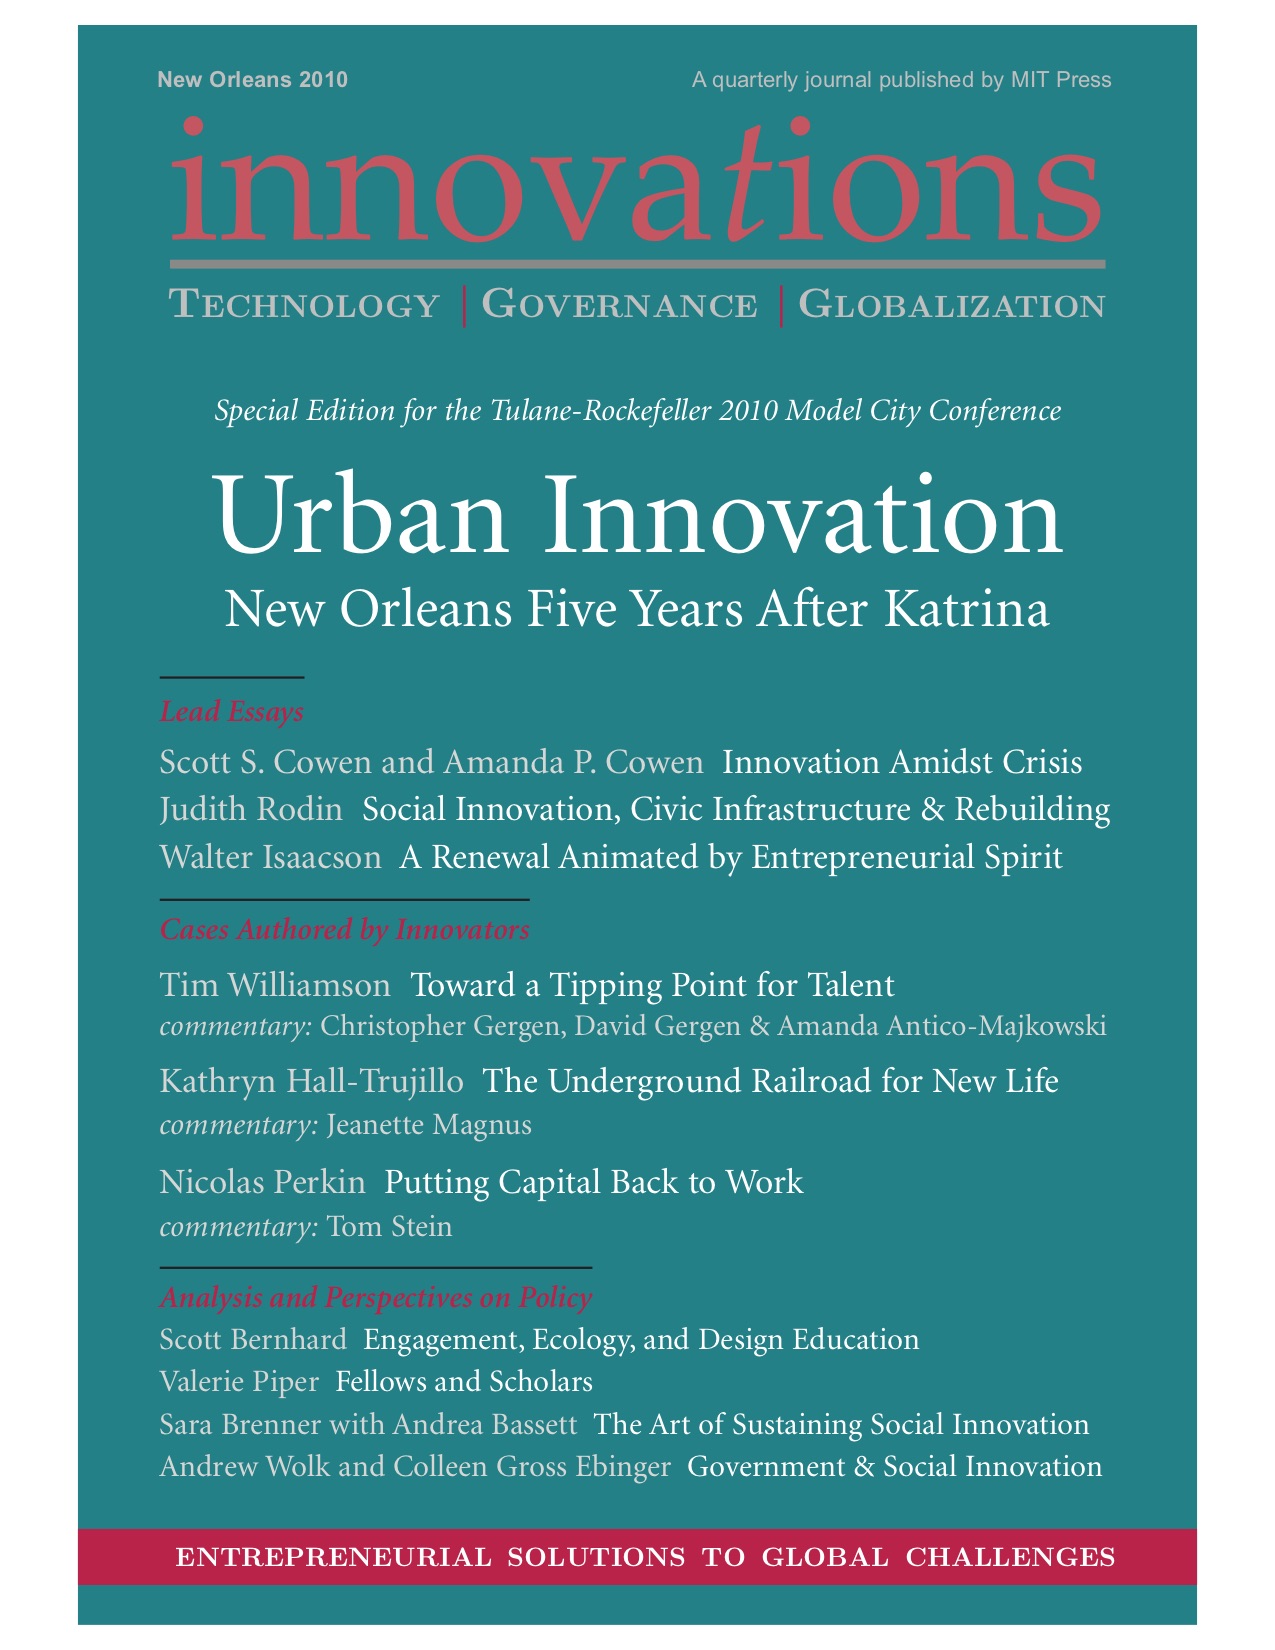 Urban Innovation: New Orleans Five Years After Katrina